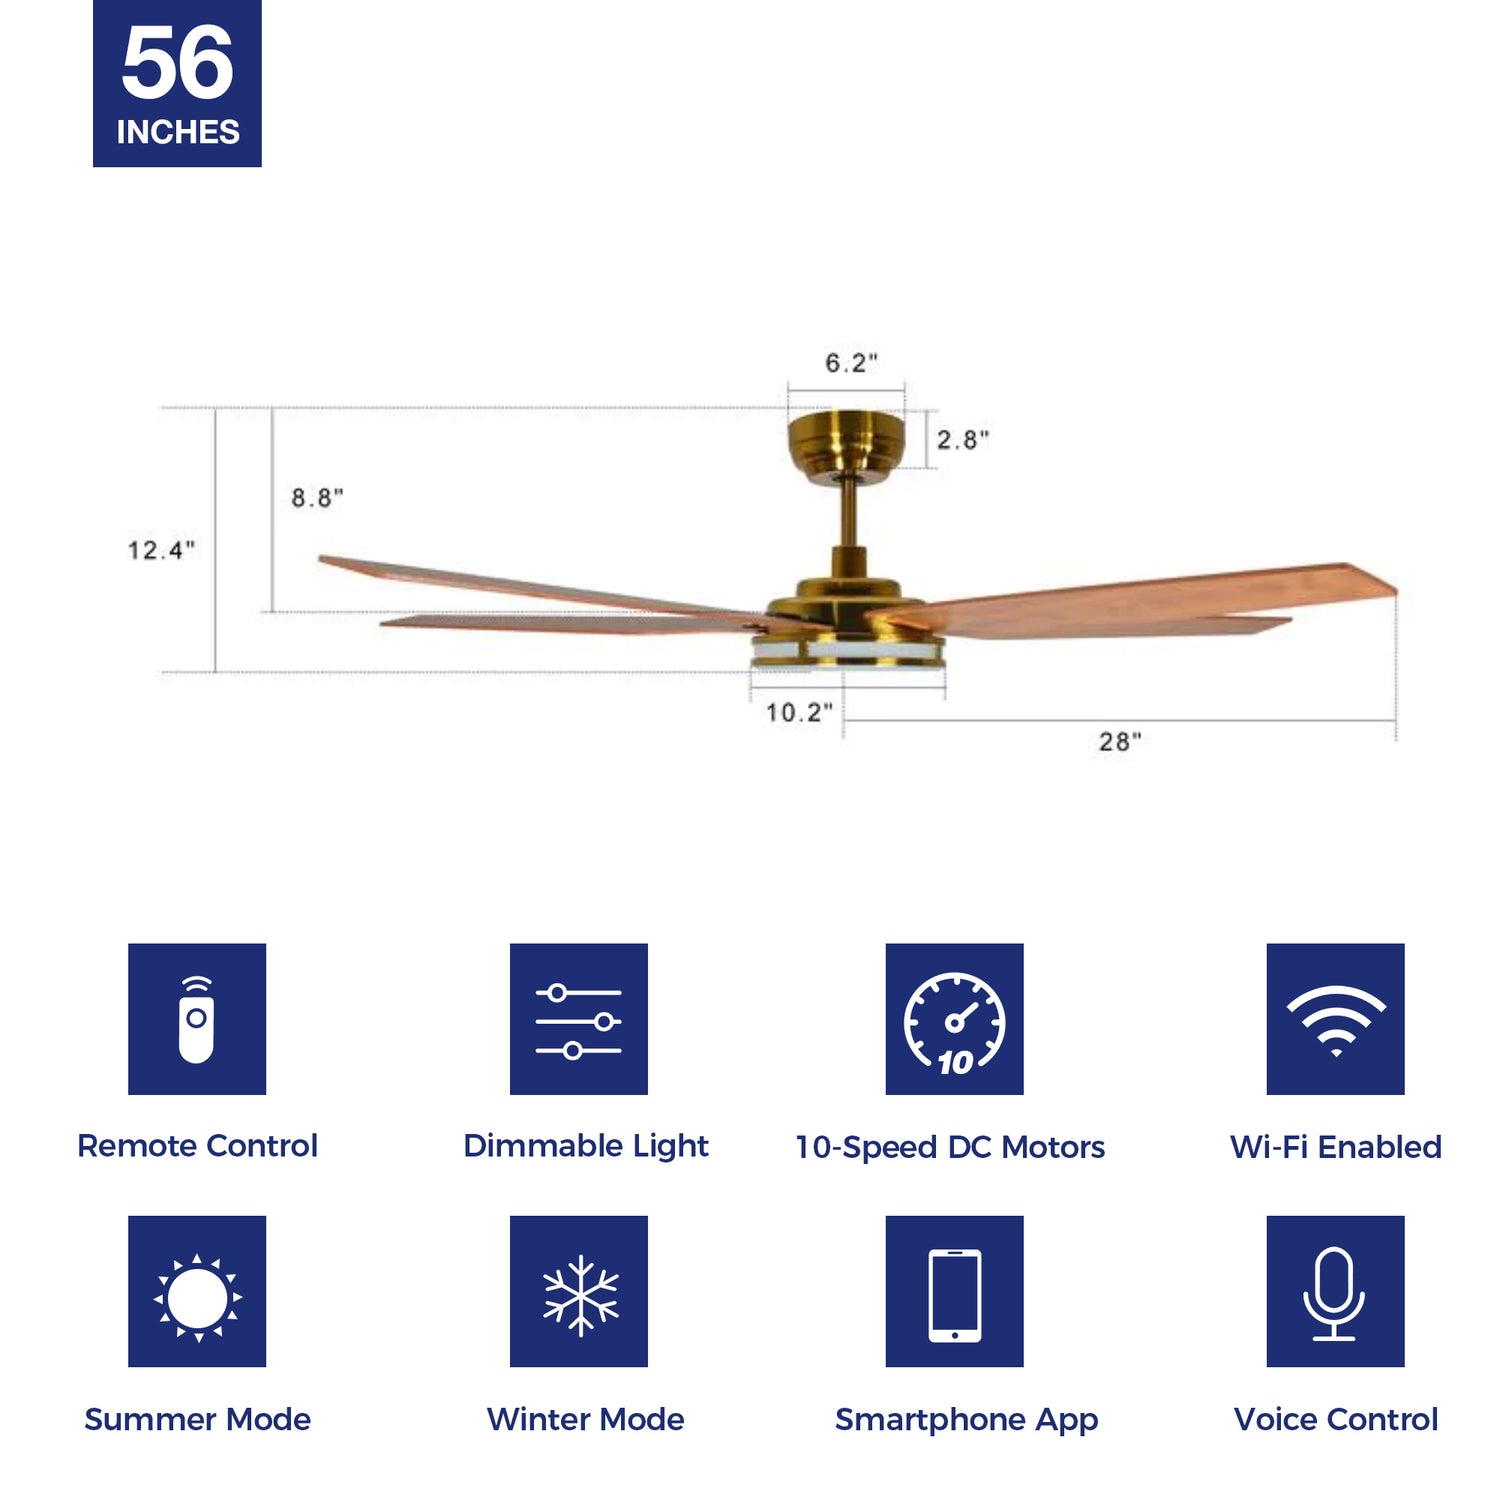 Explorer Outdoor 56&quot; Smart Ceiling Fan with LED Light Kit-Gold Case and Wood Grain Fan Blades. The fan features Remote control, Wi-Fi apps, and Voice control technology (compatible with Amazon Alexa and Google Home Assistant ) to set fan preferences. Equipped with 3000-lumen dimmable LED lights and a 10-speed DC Motor (5300CFM airflow output), it brings you cool and bright. 